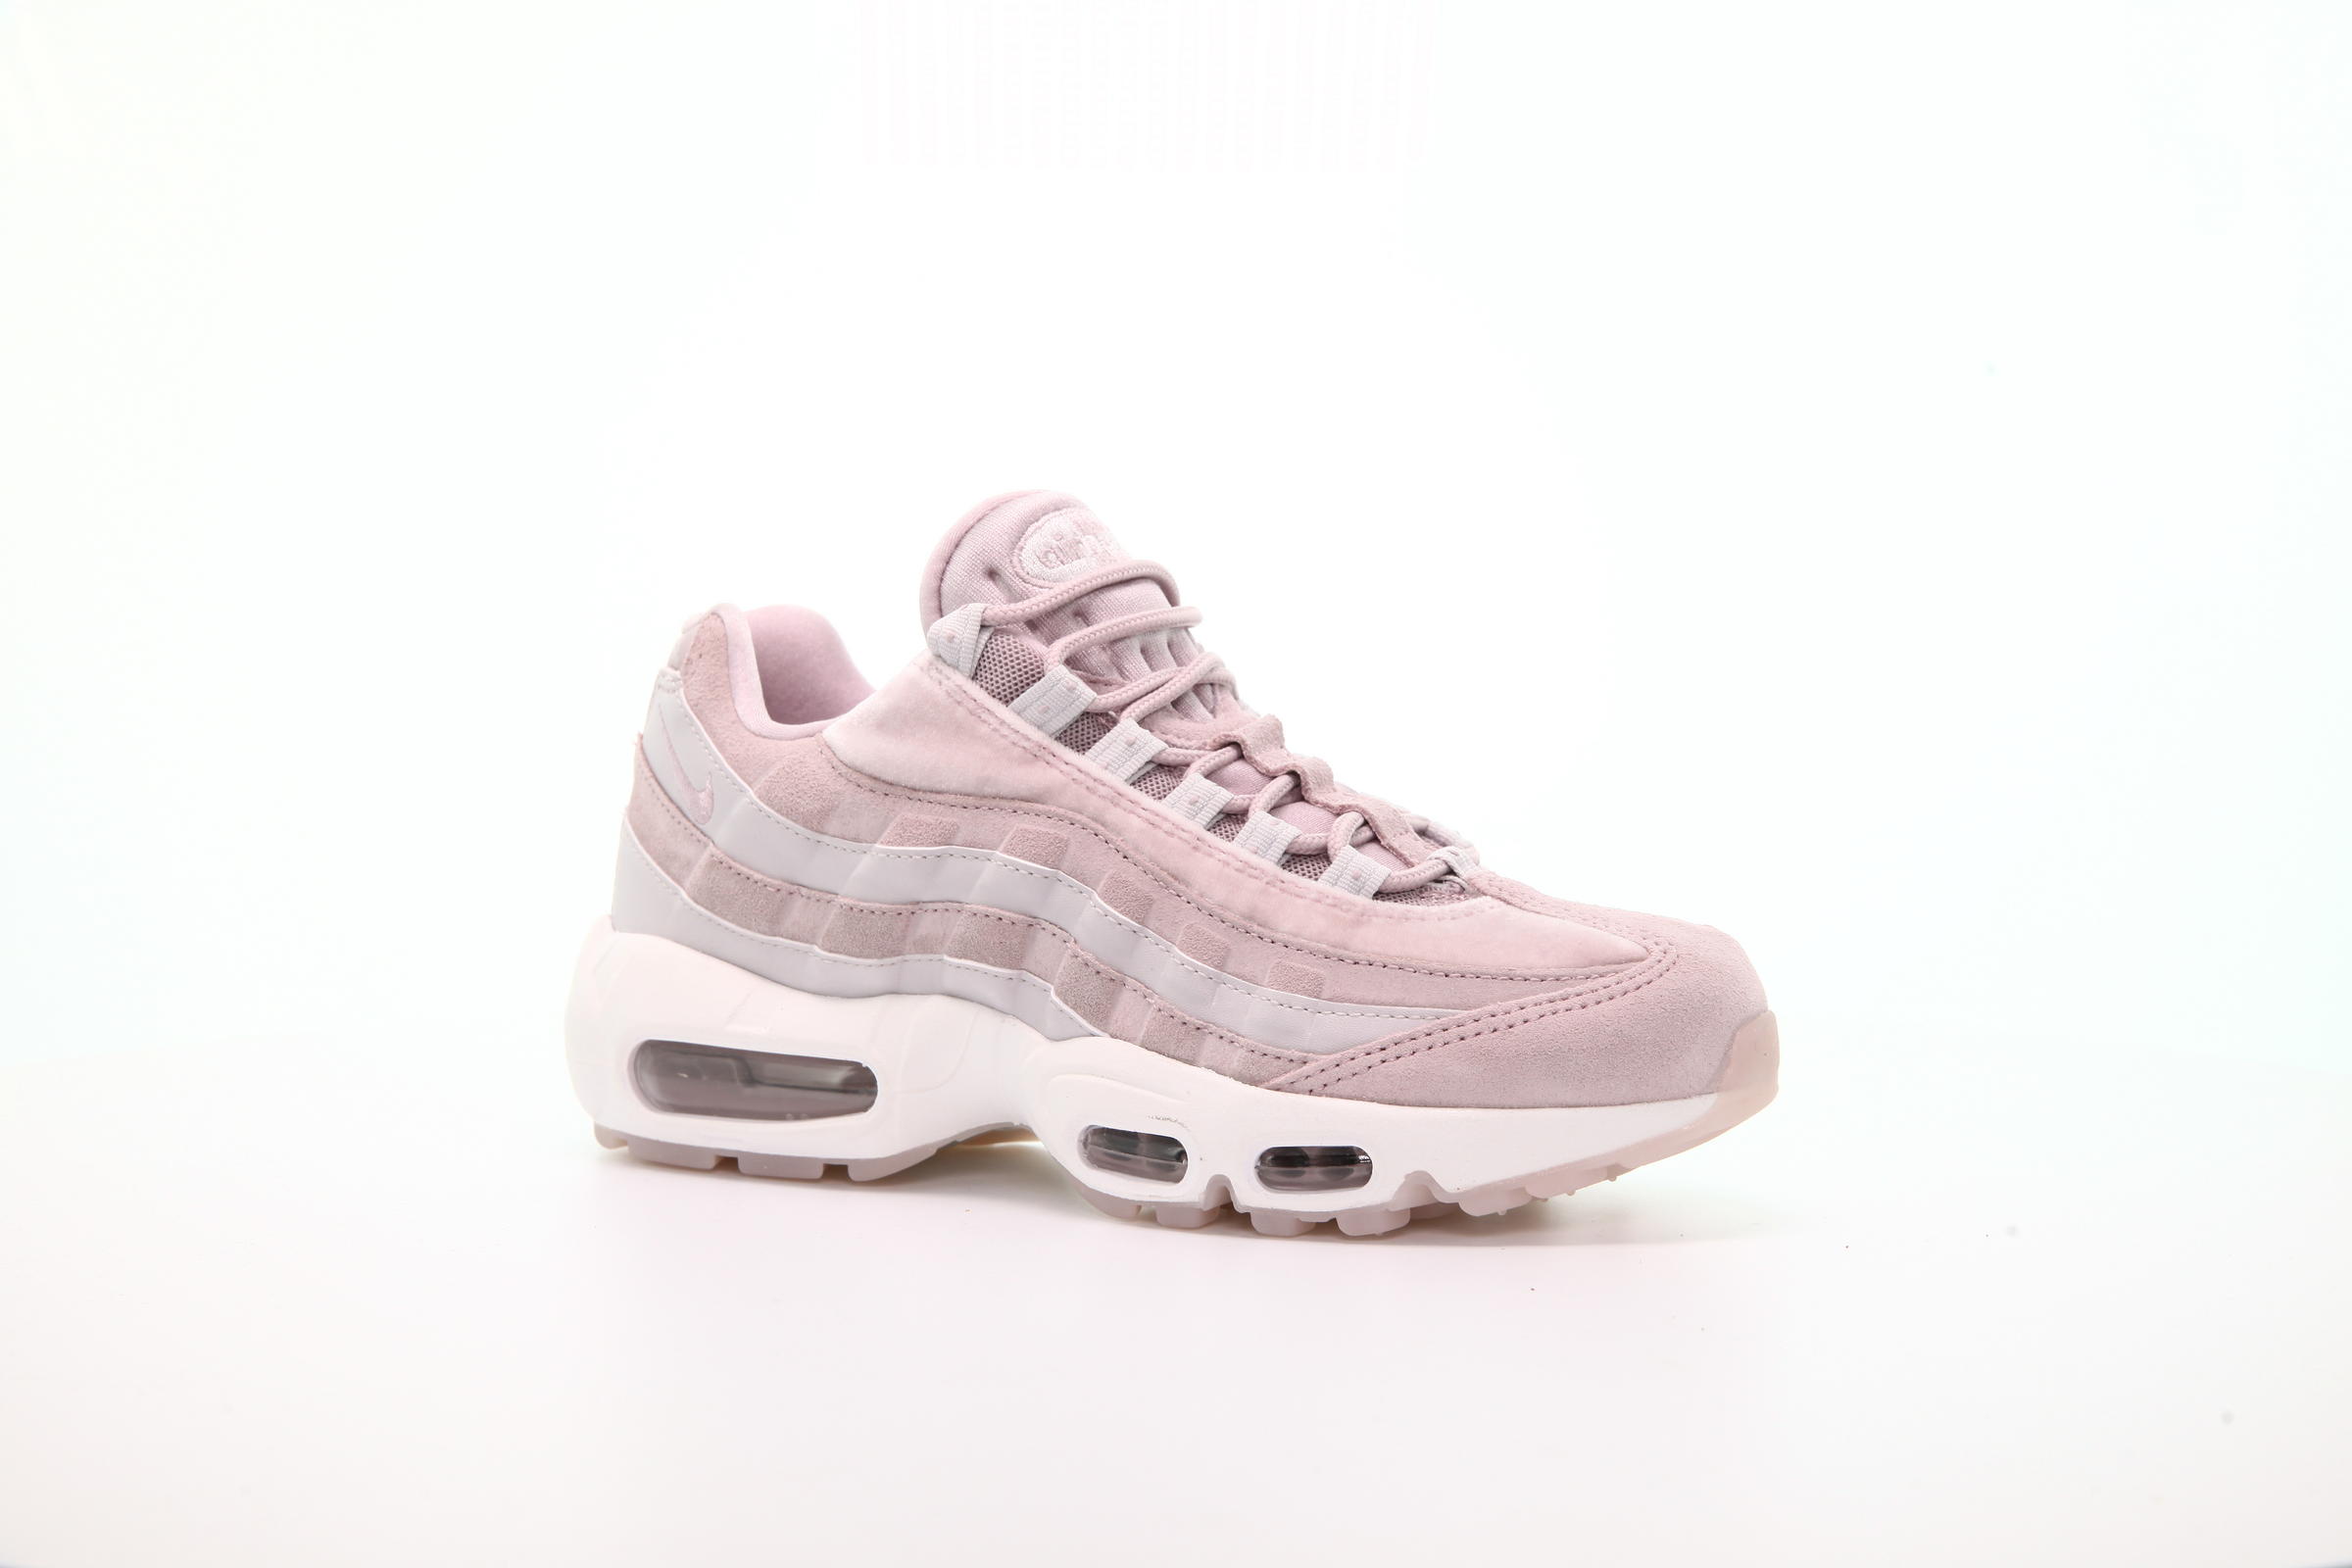 Nike WMNS Air Max 95 LX "Particle Rose"